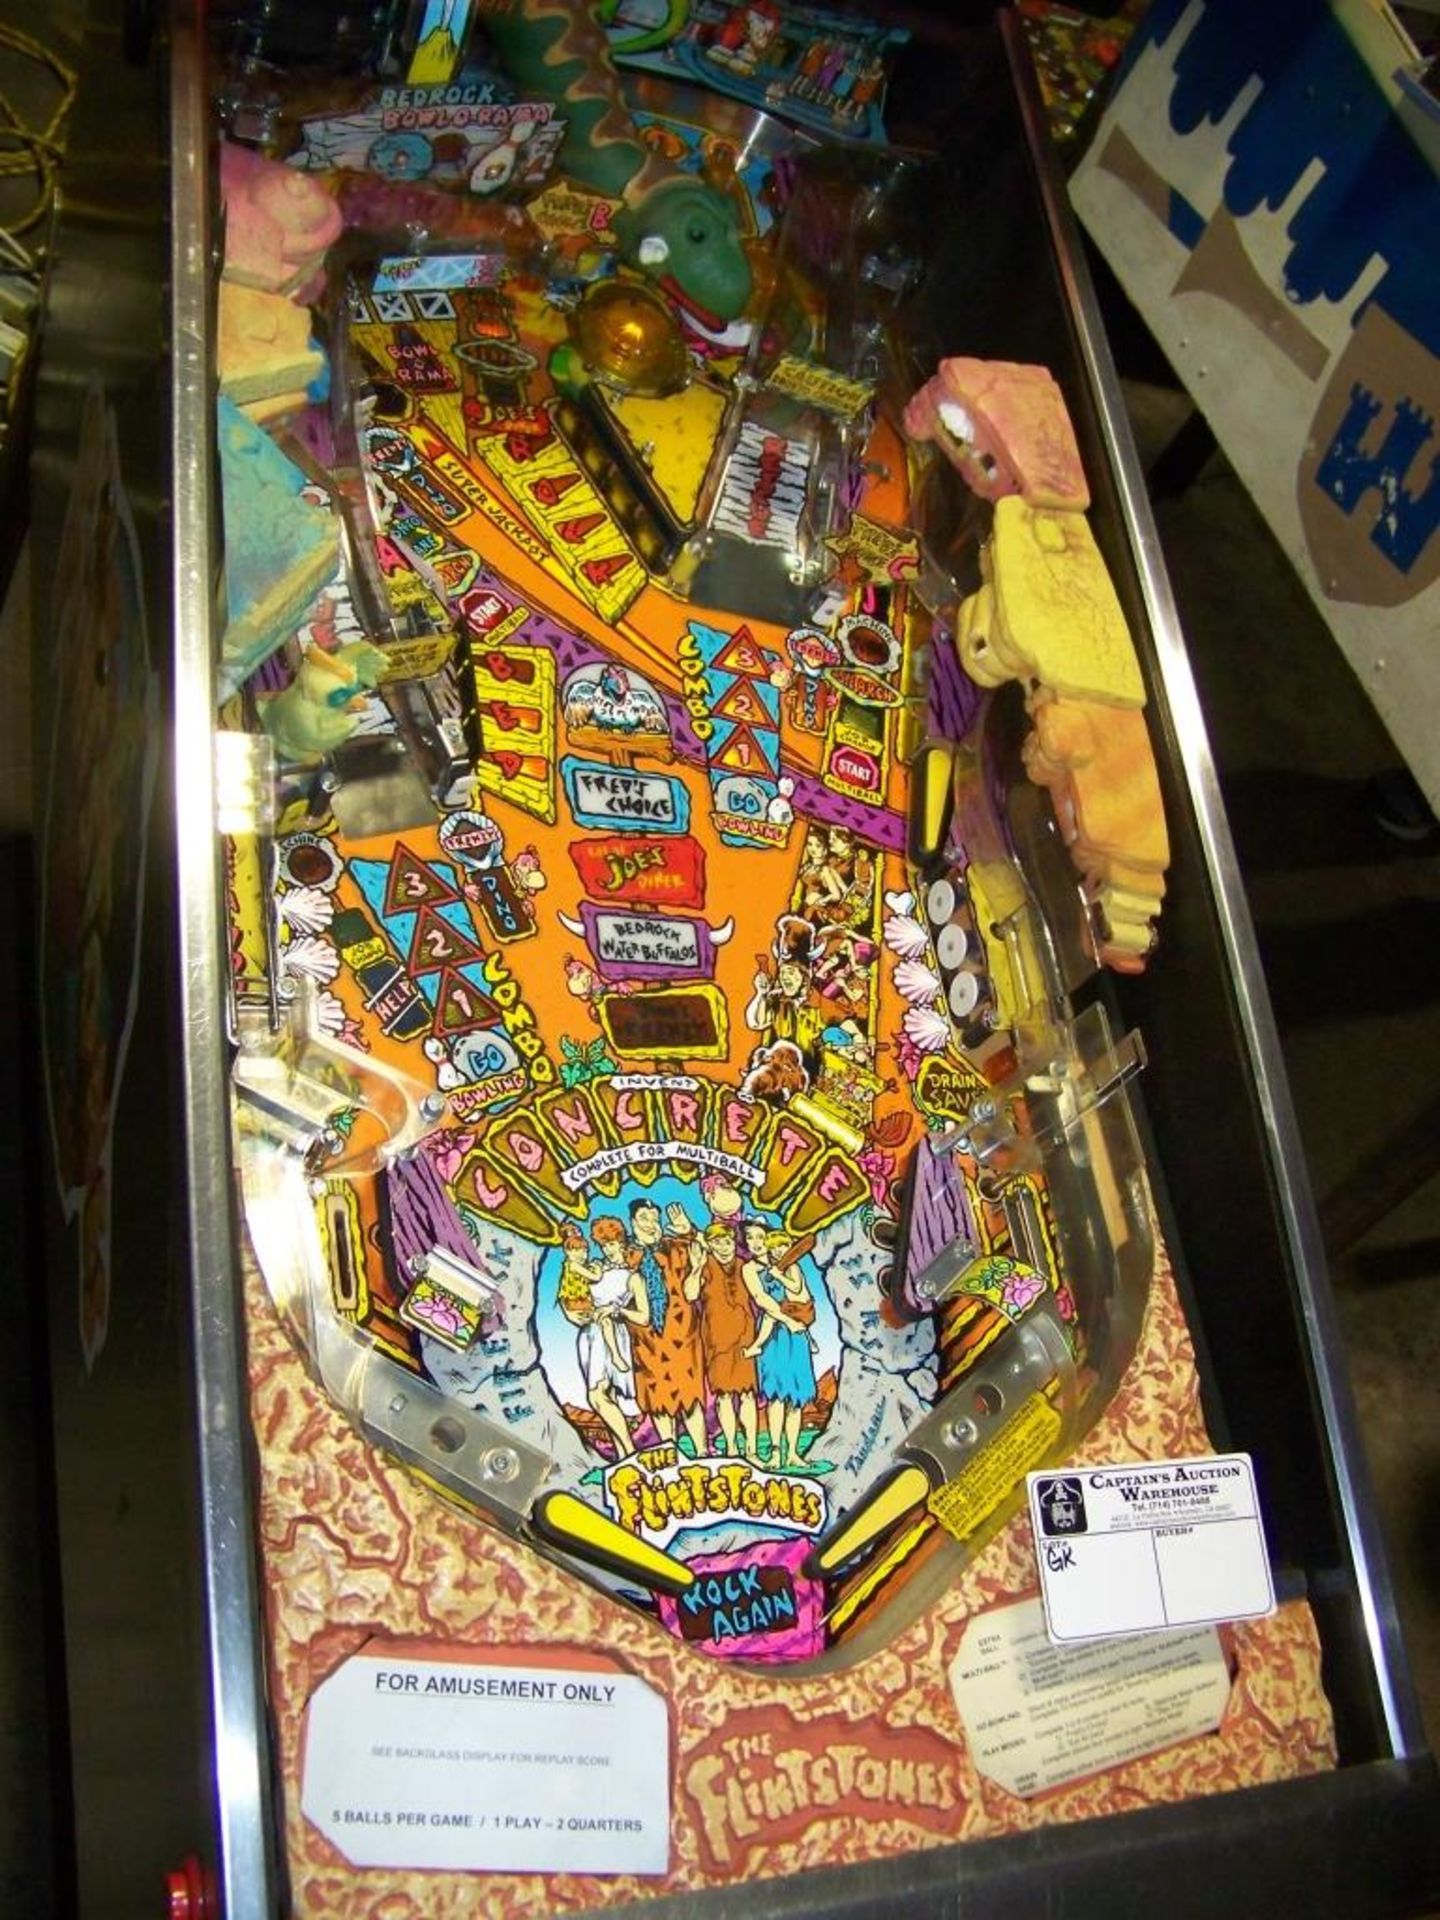 FLINSTONES THE MOVIE PINBALL MACHINE WILLIAMS 1994 Item is in used condition. Evidence of wear and - Image 9 of 11